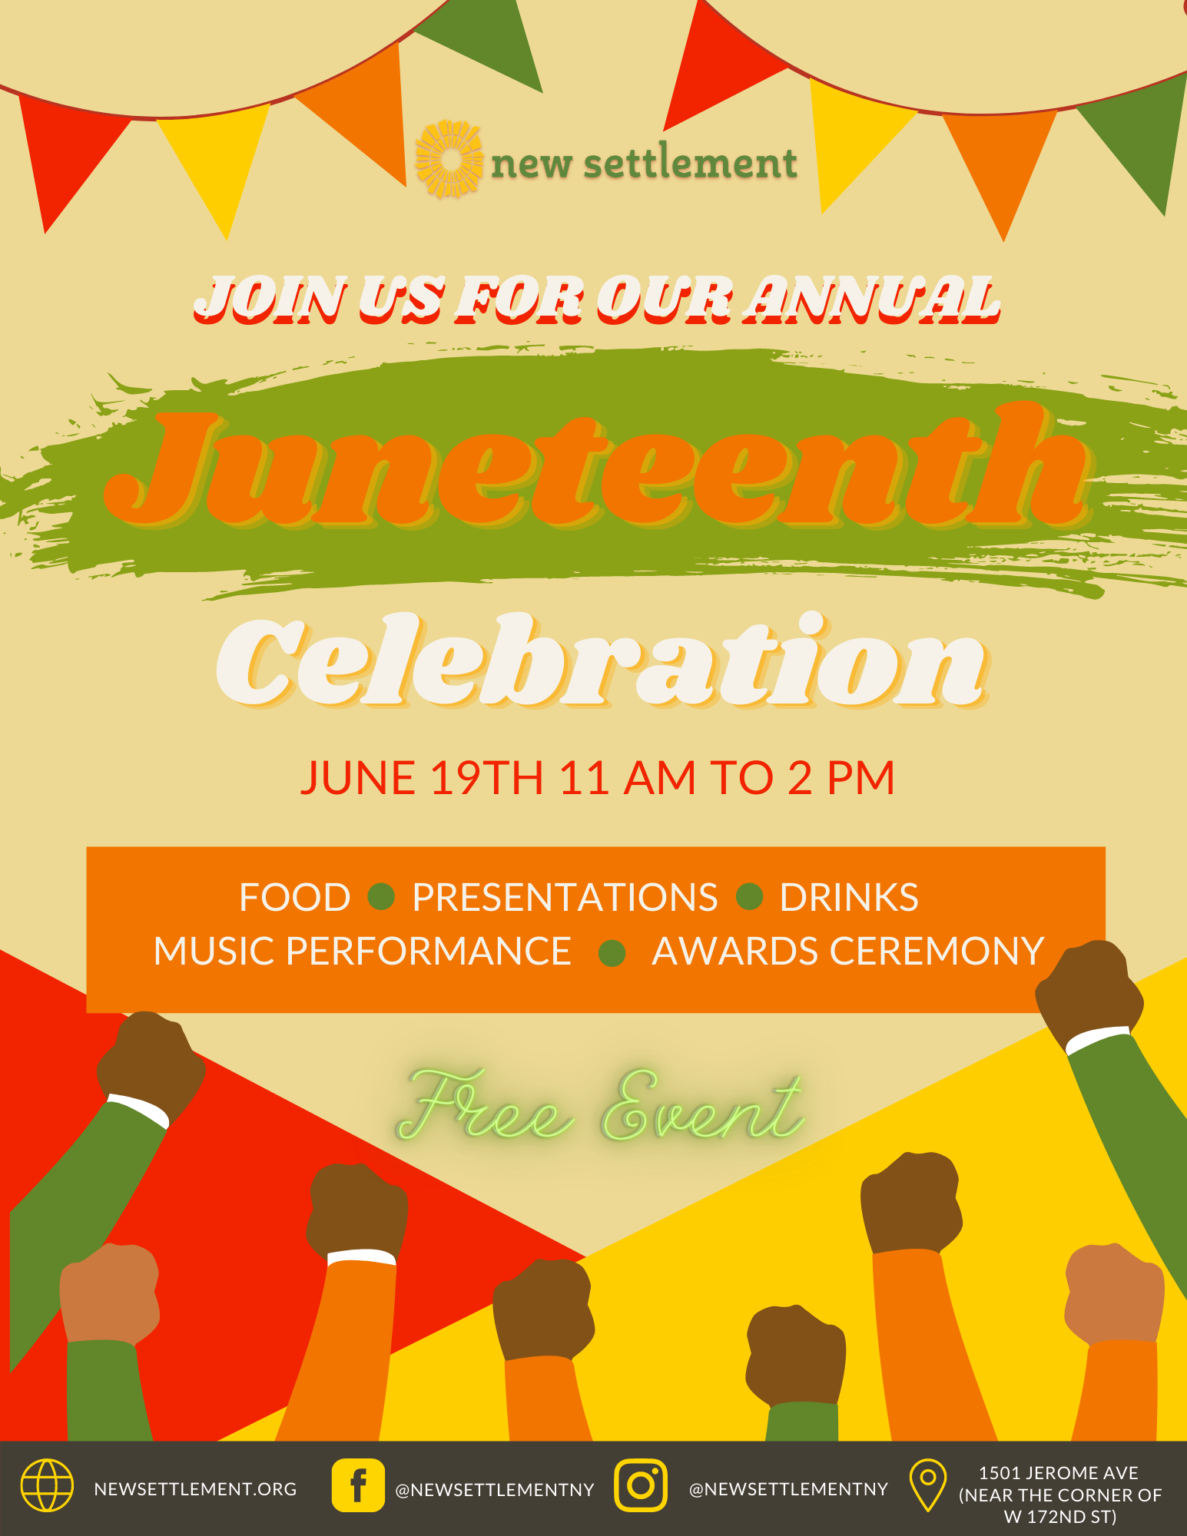 you-are-invited-to-celebrate-juneteenth-with-new-settlement-new